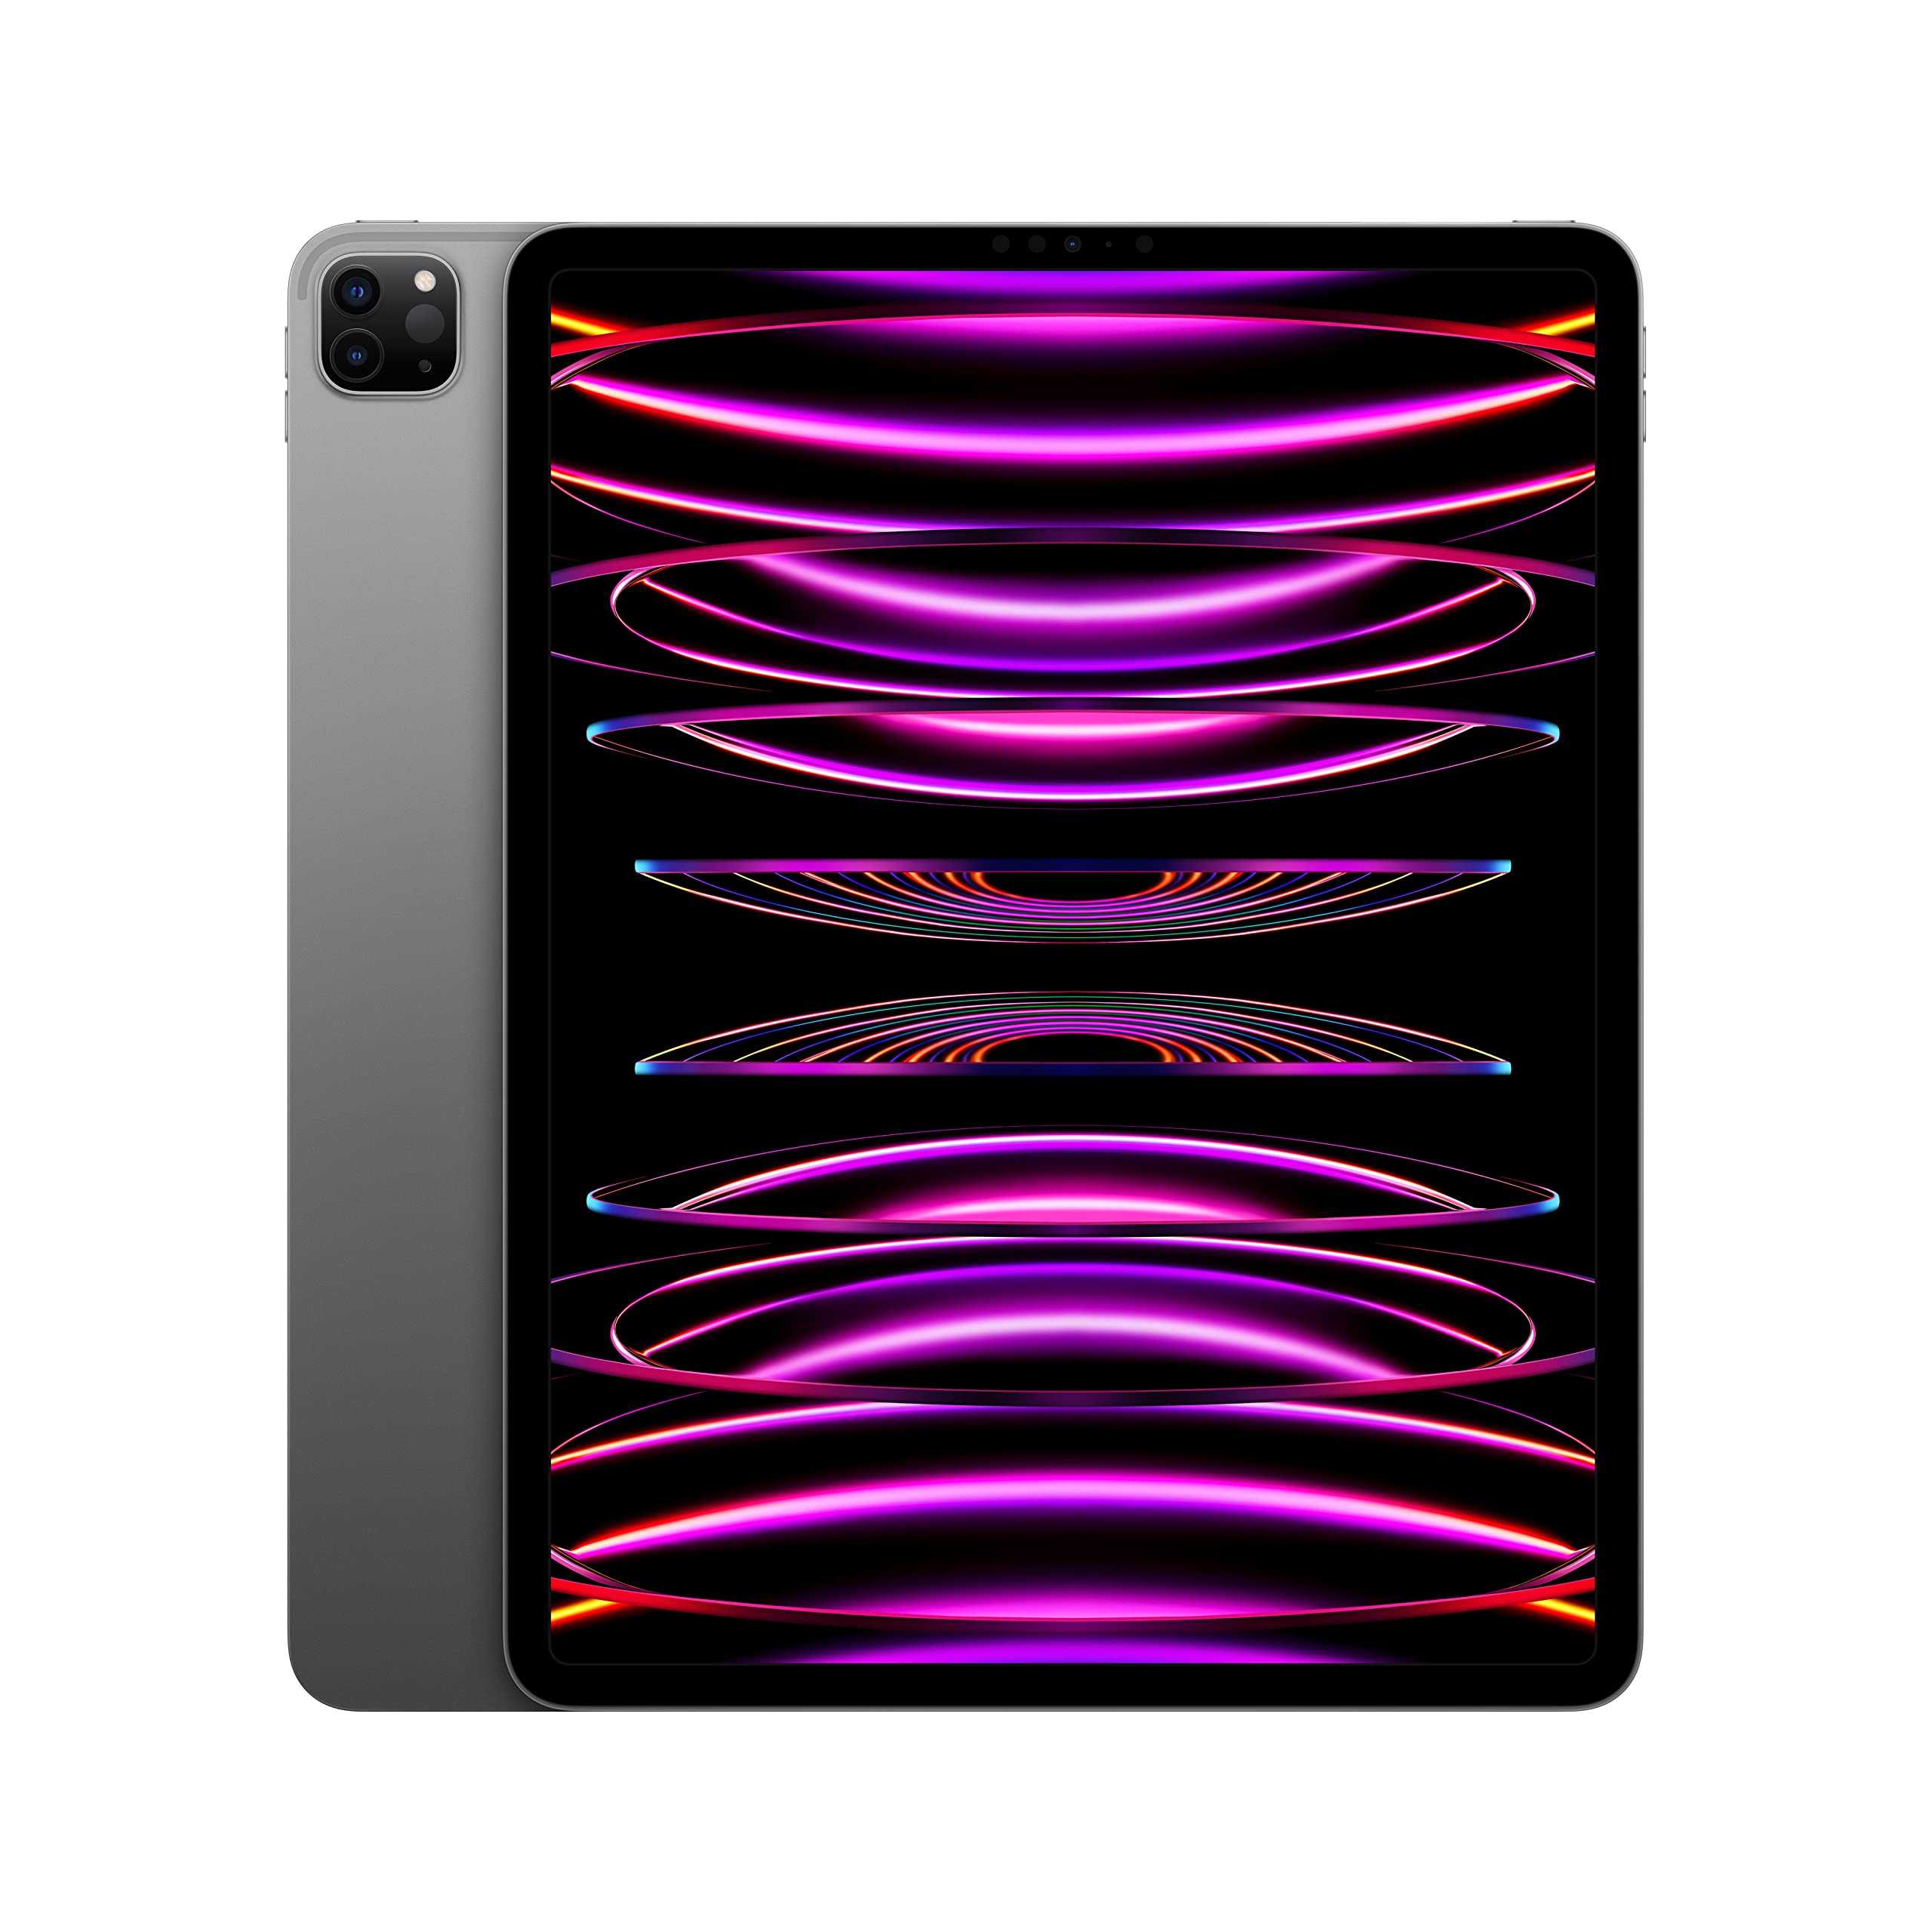 Apple iPad Pro 12.9-inch (6th Generation): with M2 chip, Liquid Retina XDR Display, 2TB, Wi-Fi 6E, 12MP front/12MP and 10MP Back Cameras, Face ID, All-Day Battery Life – Space Gray